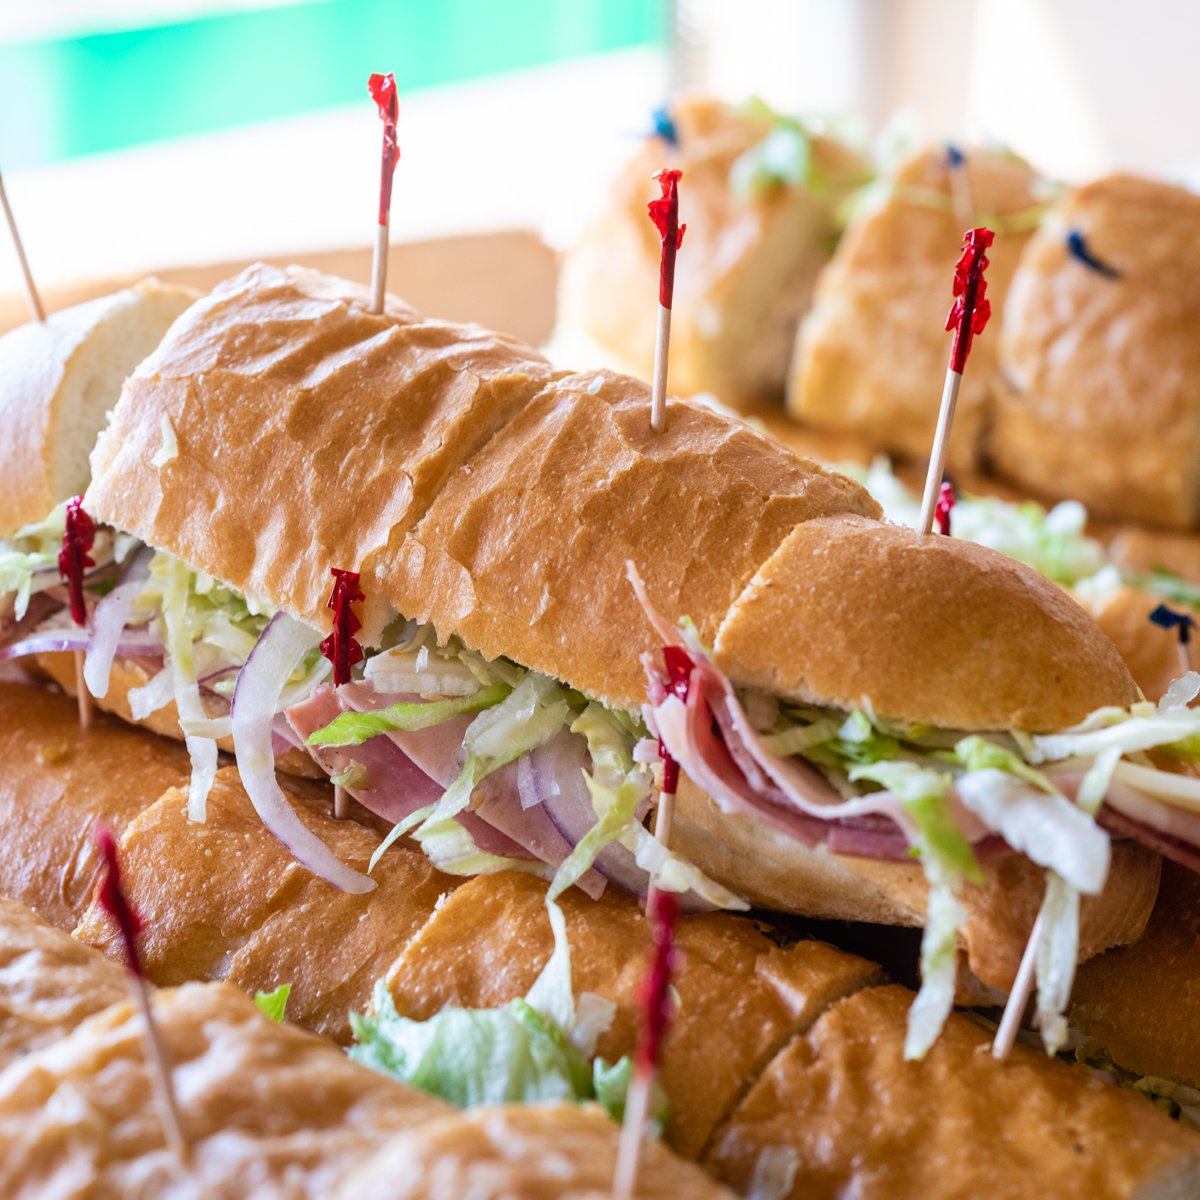 Do you know someone who still needs to try one of our signature sandwiches? Tag them in the comments below! #TheOriginalNottoliAndSon #ItalianSandwich